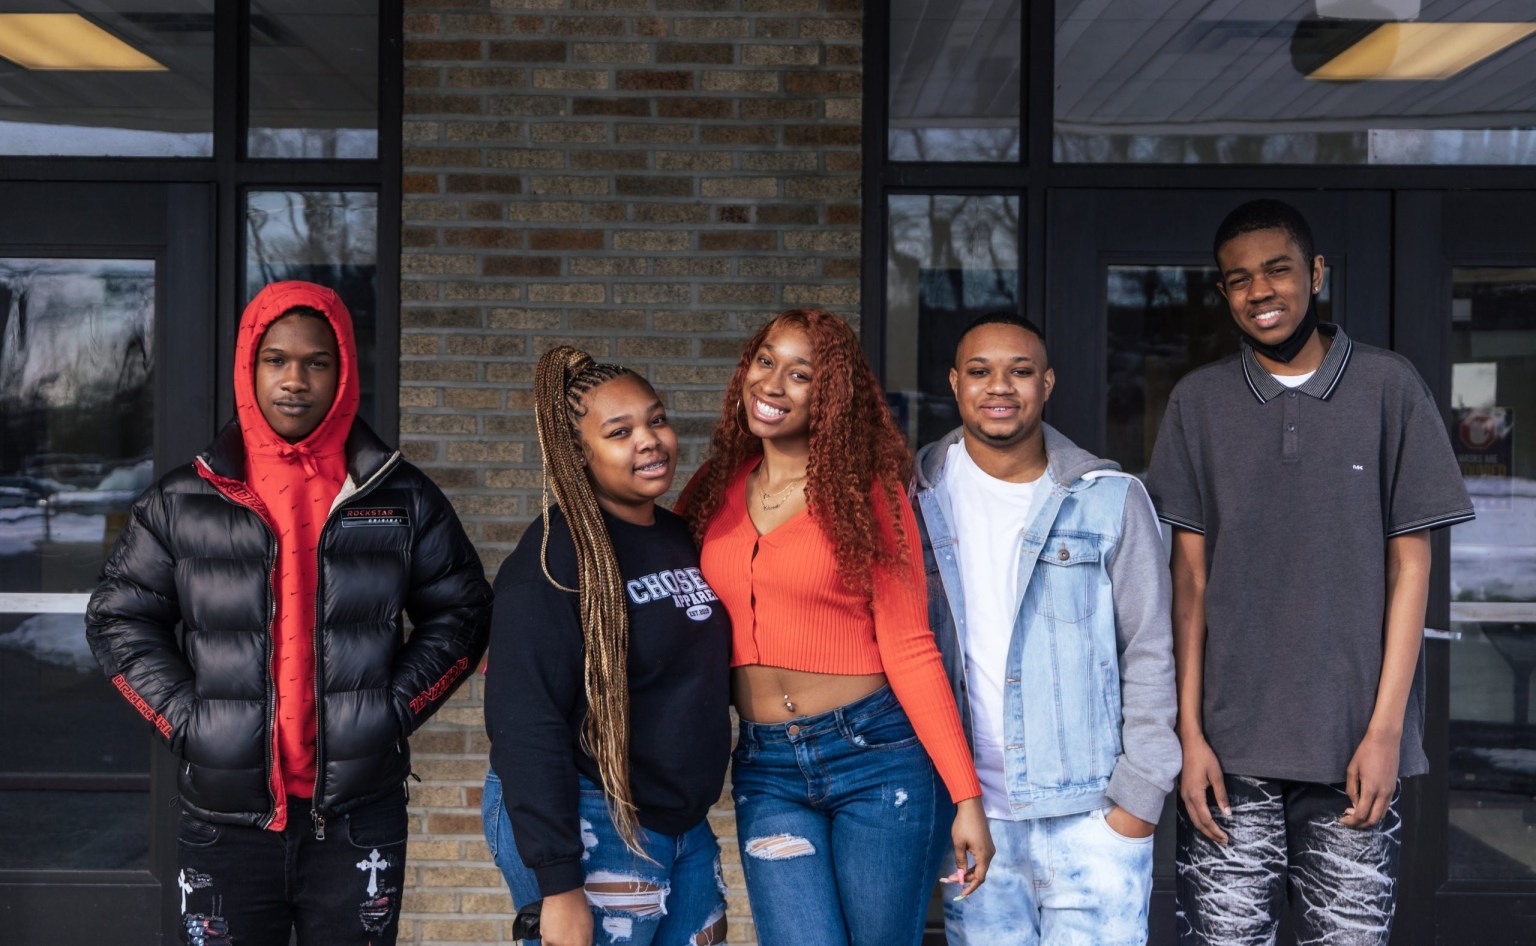 ‘All it takes is courage’: 5 Pittsburgh seniors share aspirations after navigating high school in the pandemic